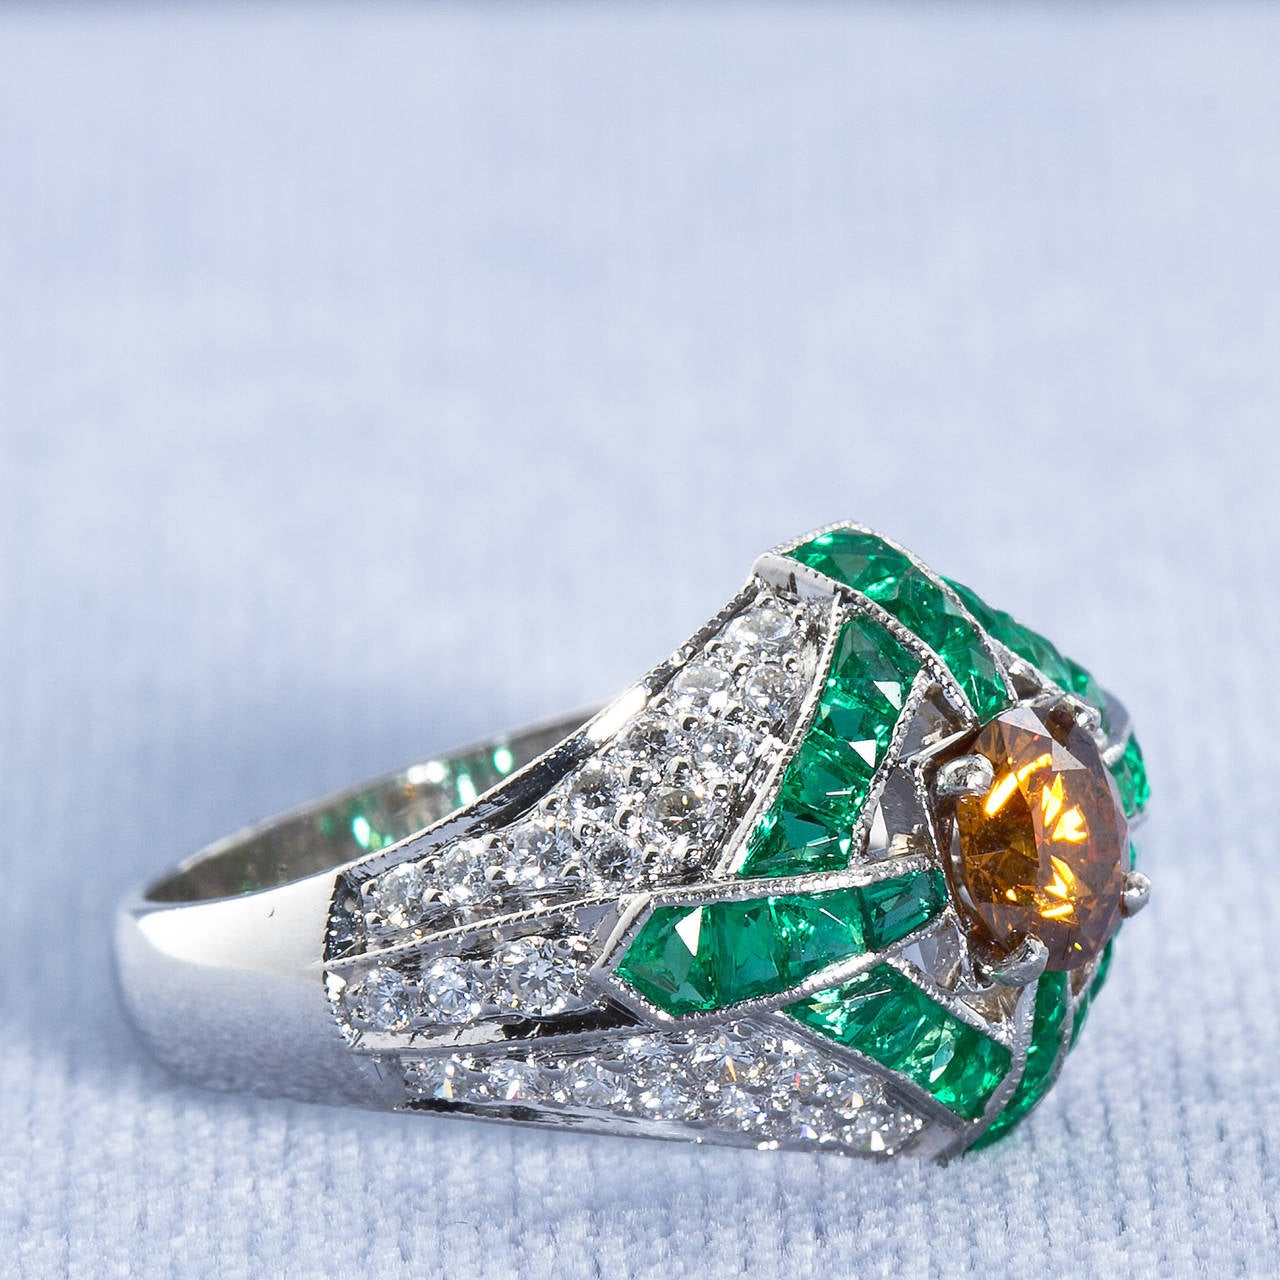 A natural fancy color diamond of vivid orange yellow color set in an elaborate diamond pave domed Art Deco style platinum and calibrated French cut emeralds ring. Center diamond is a round brilliant cut 0.82 carat weight measuring 5.67 - 5.72 x